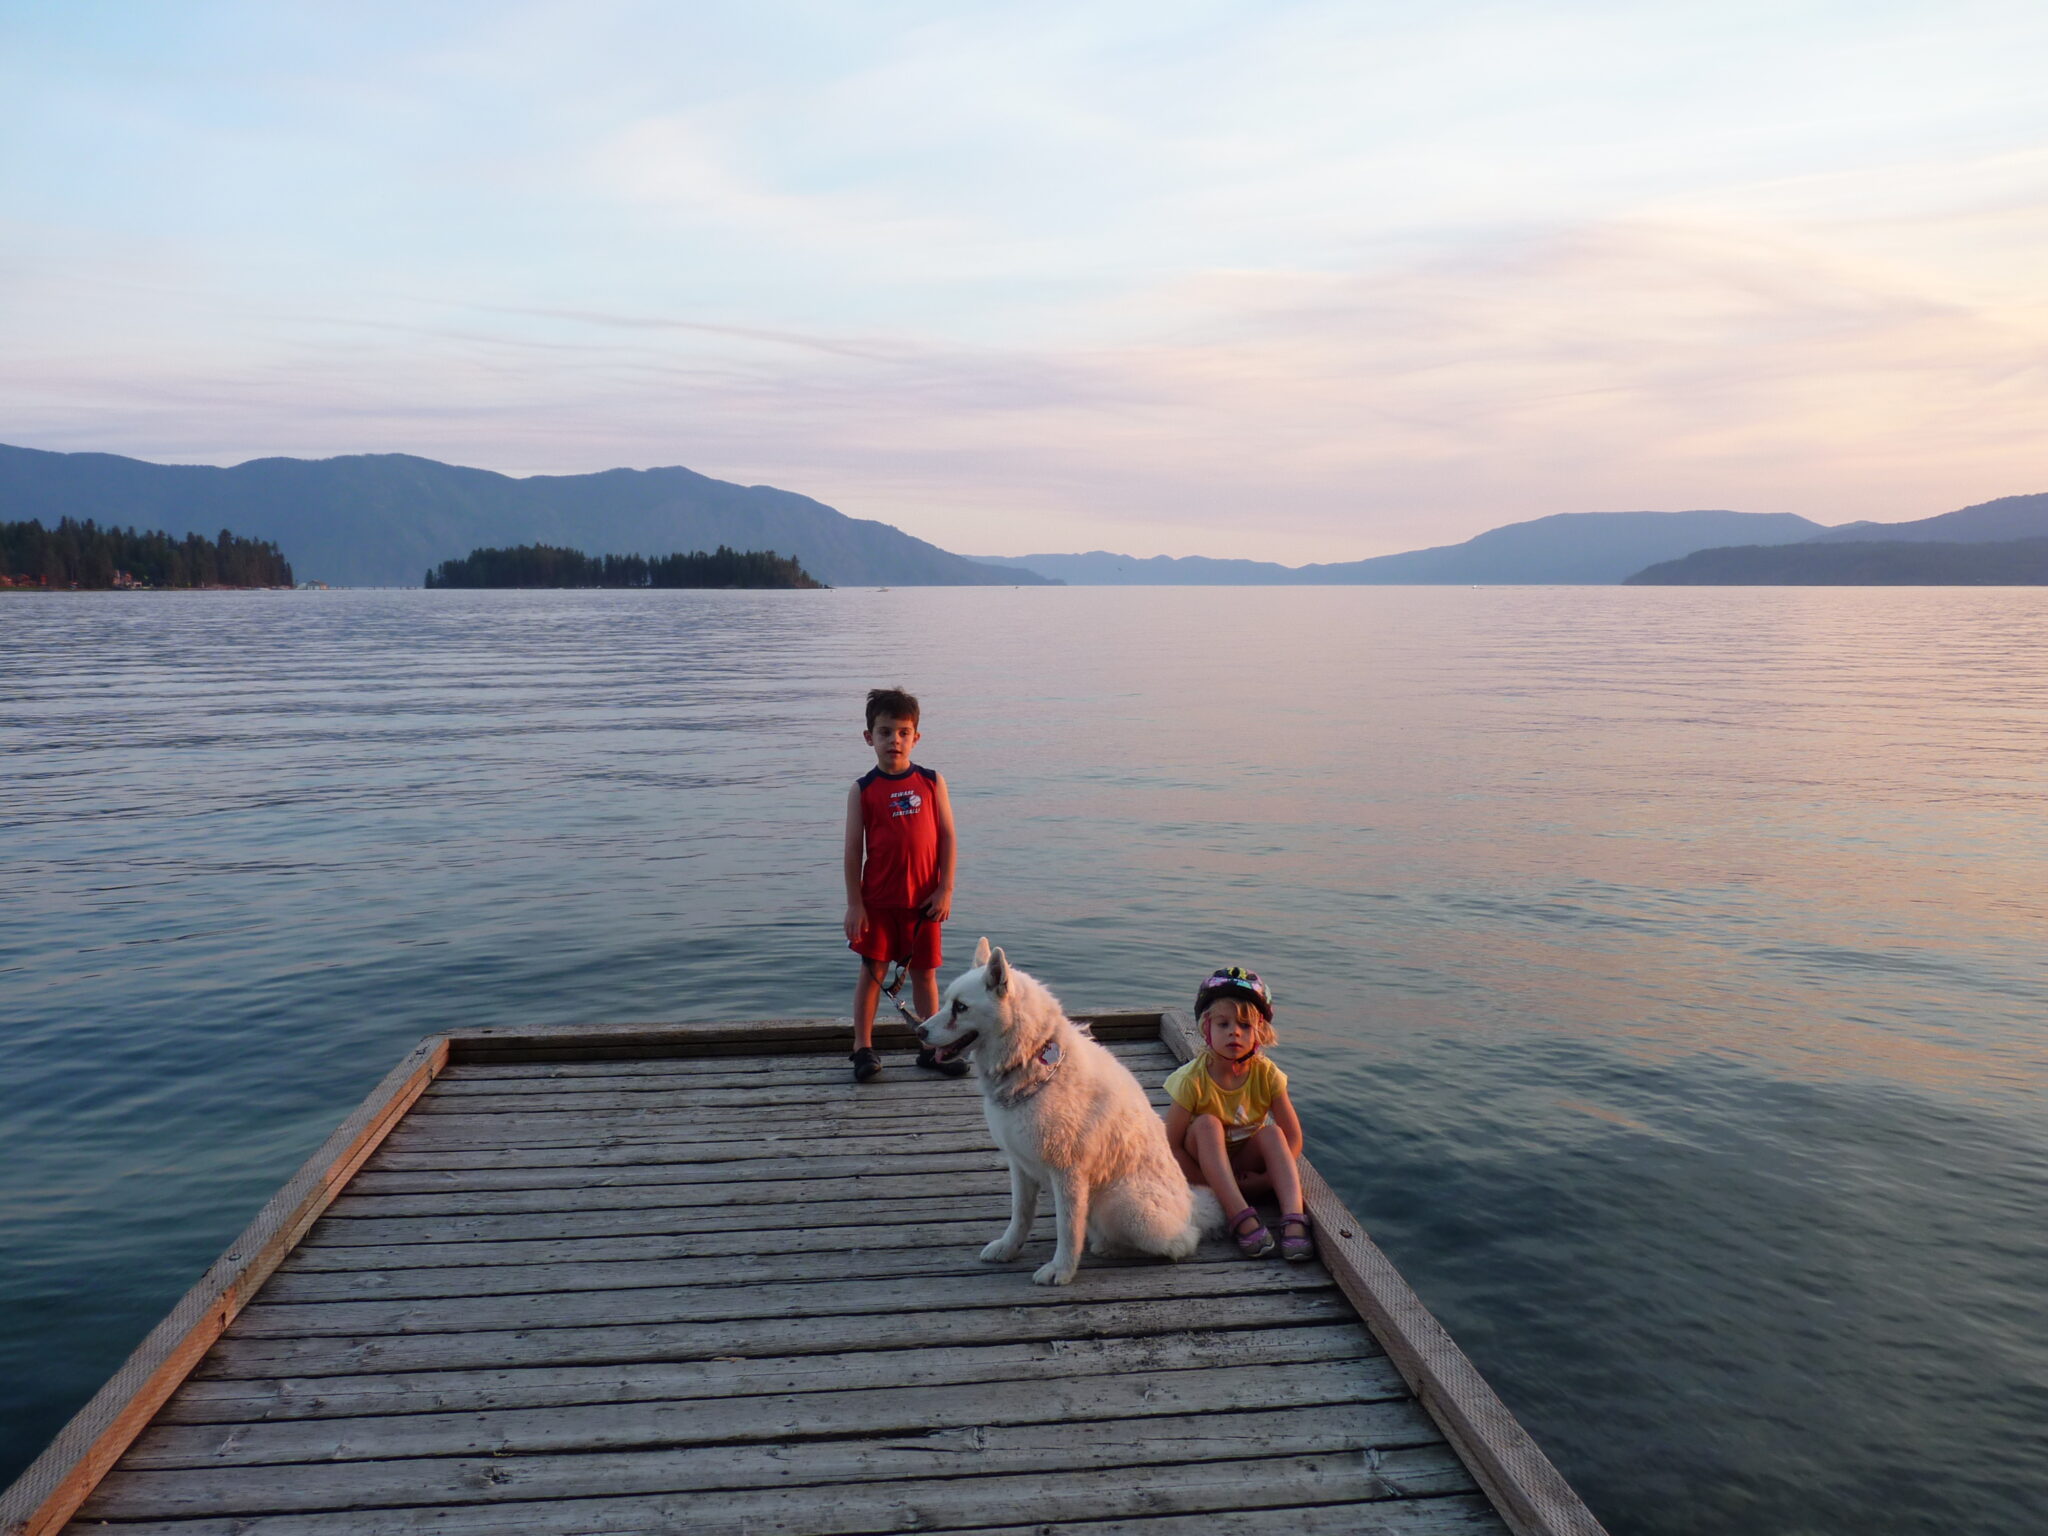 Two young children with their dock standing on a dock at sunset at Lake Pend Oreille, with forested hills in the far distance.